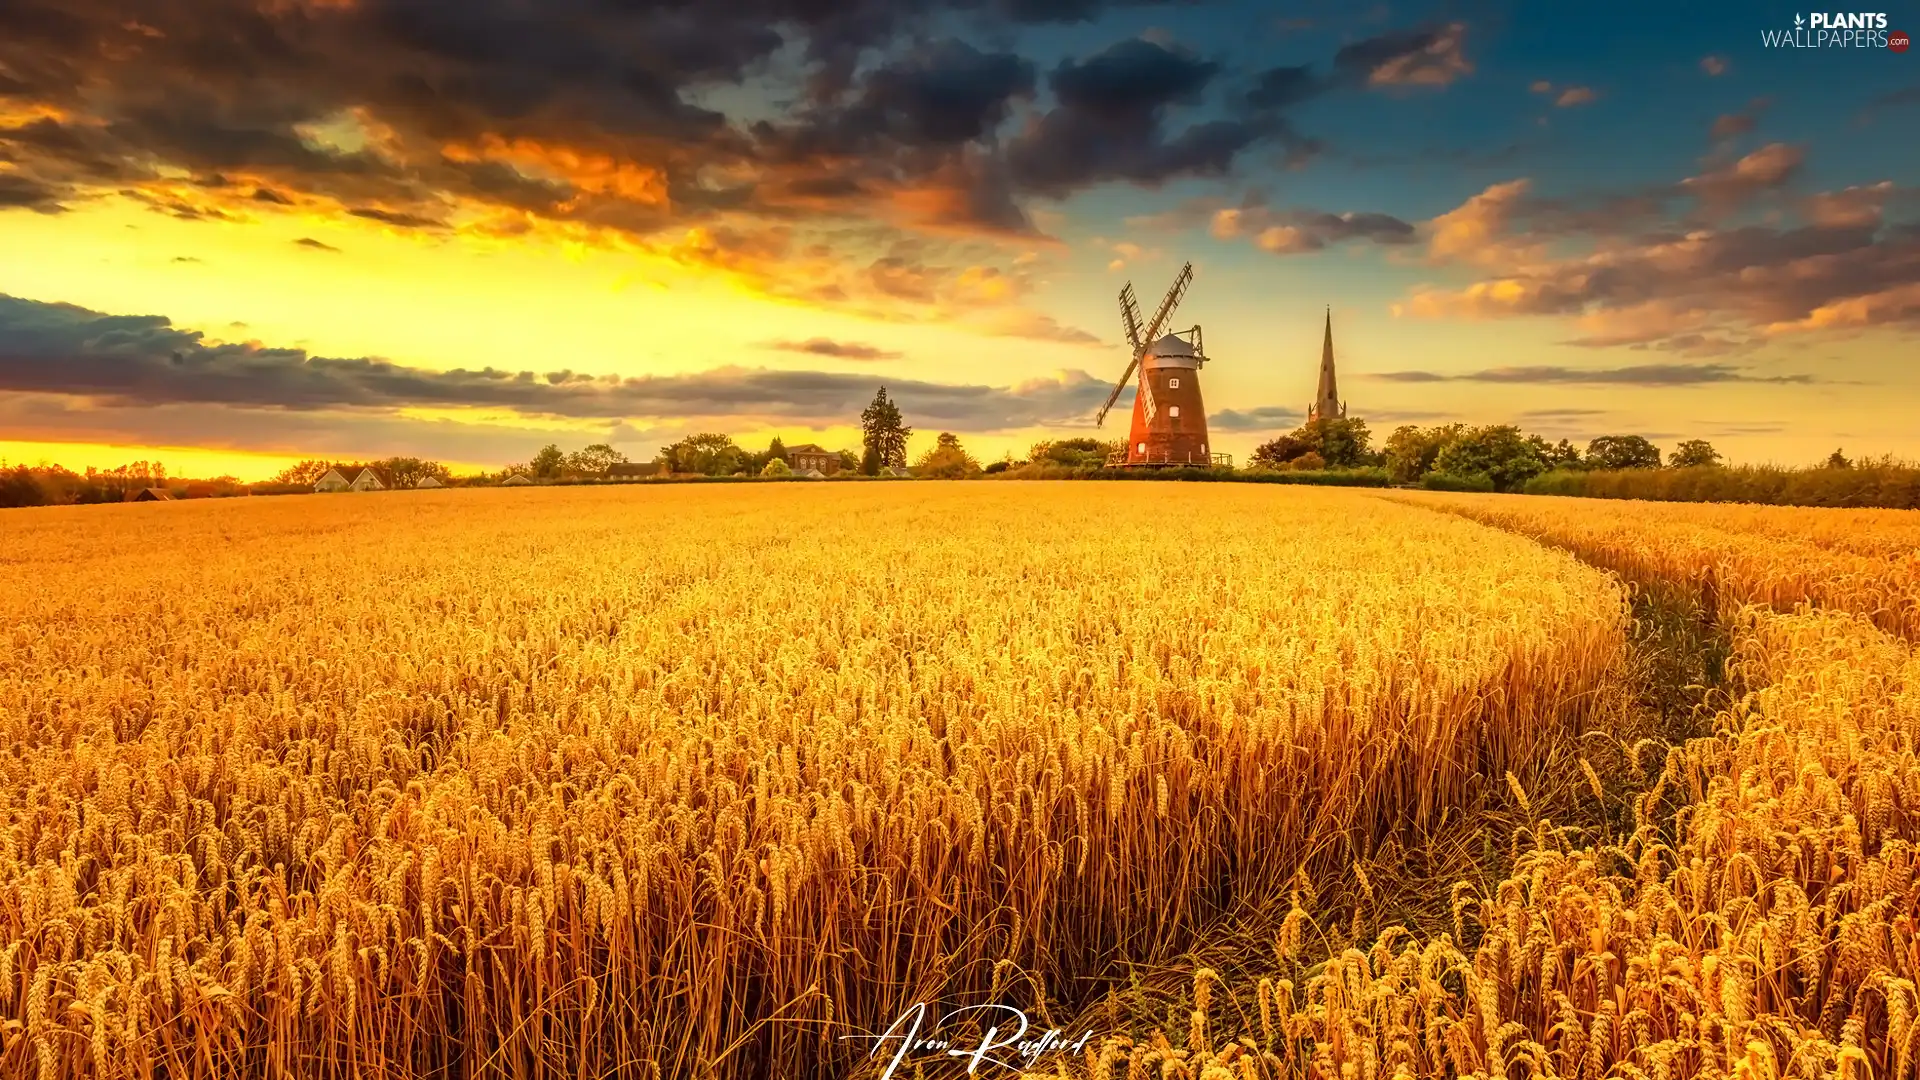 Houses, corn, viewes, Windmill, Field, trees, clouds